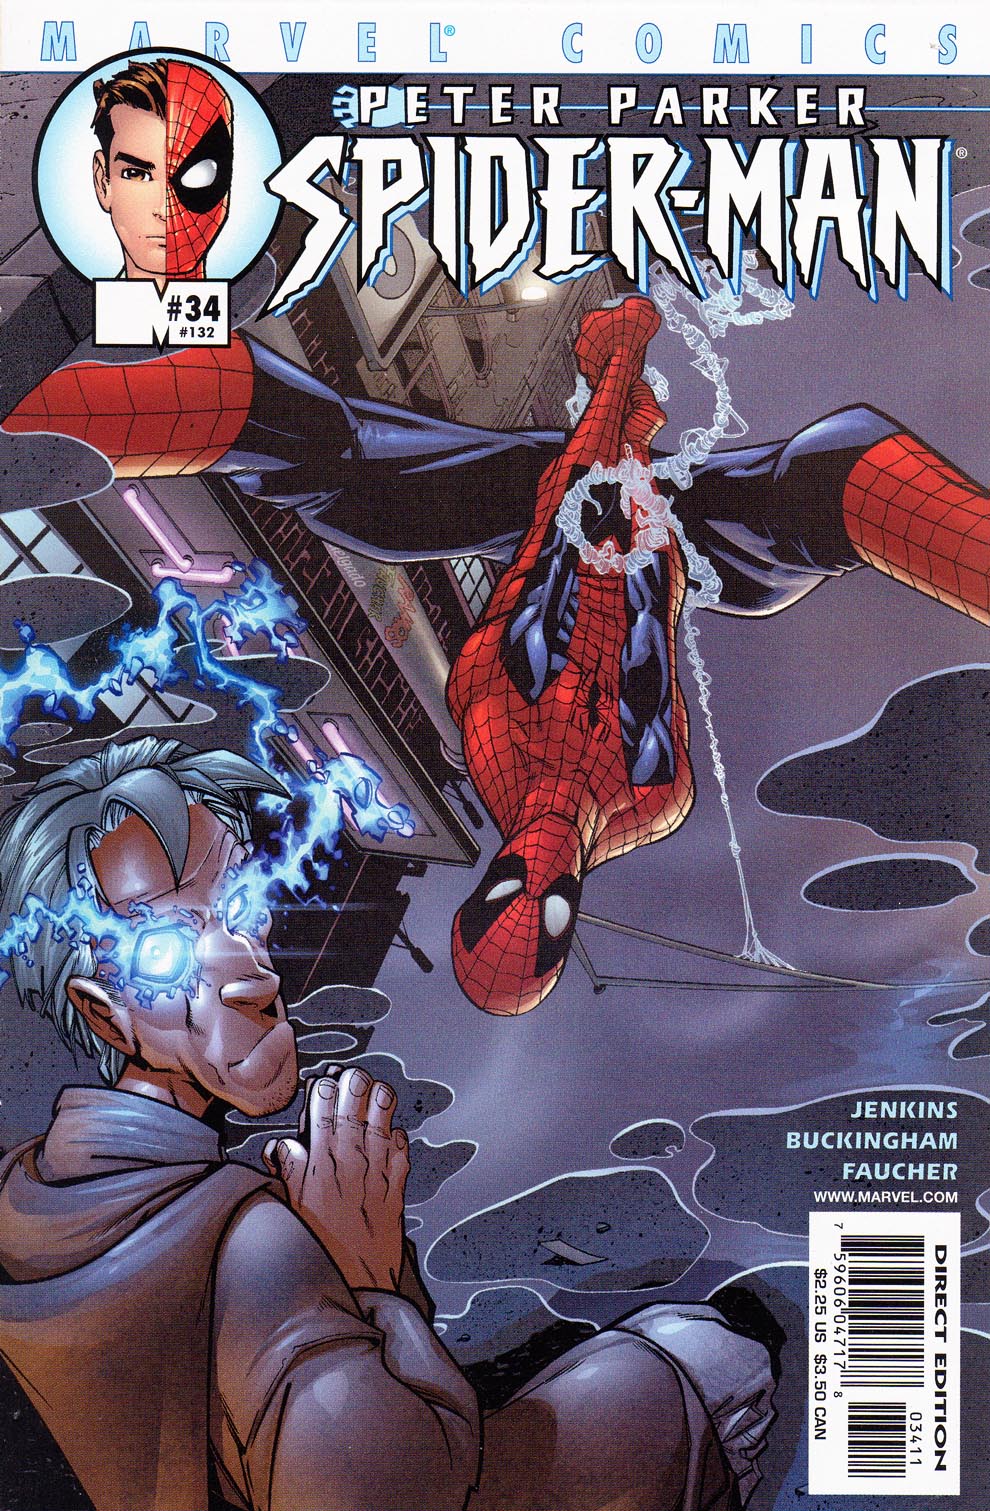 Read online Peter Parker: Spider-Man comic -  Issue #34 - 1